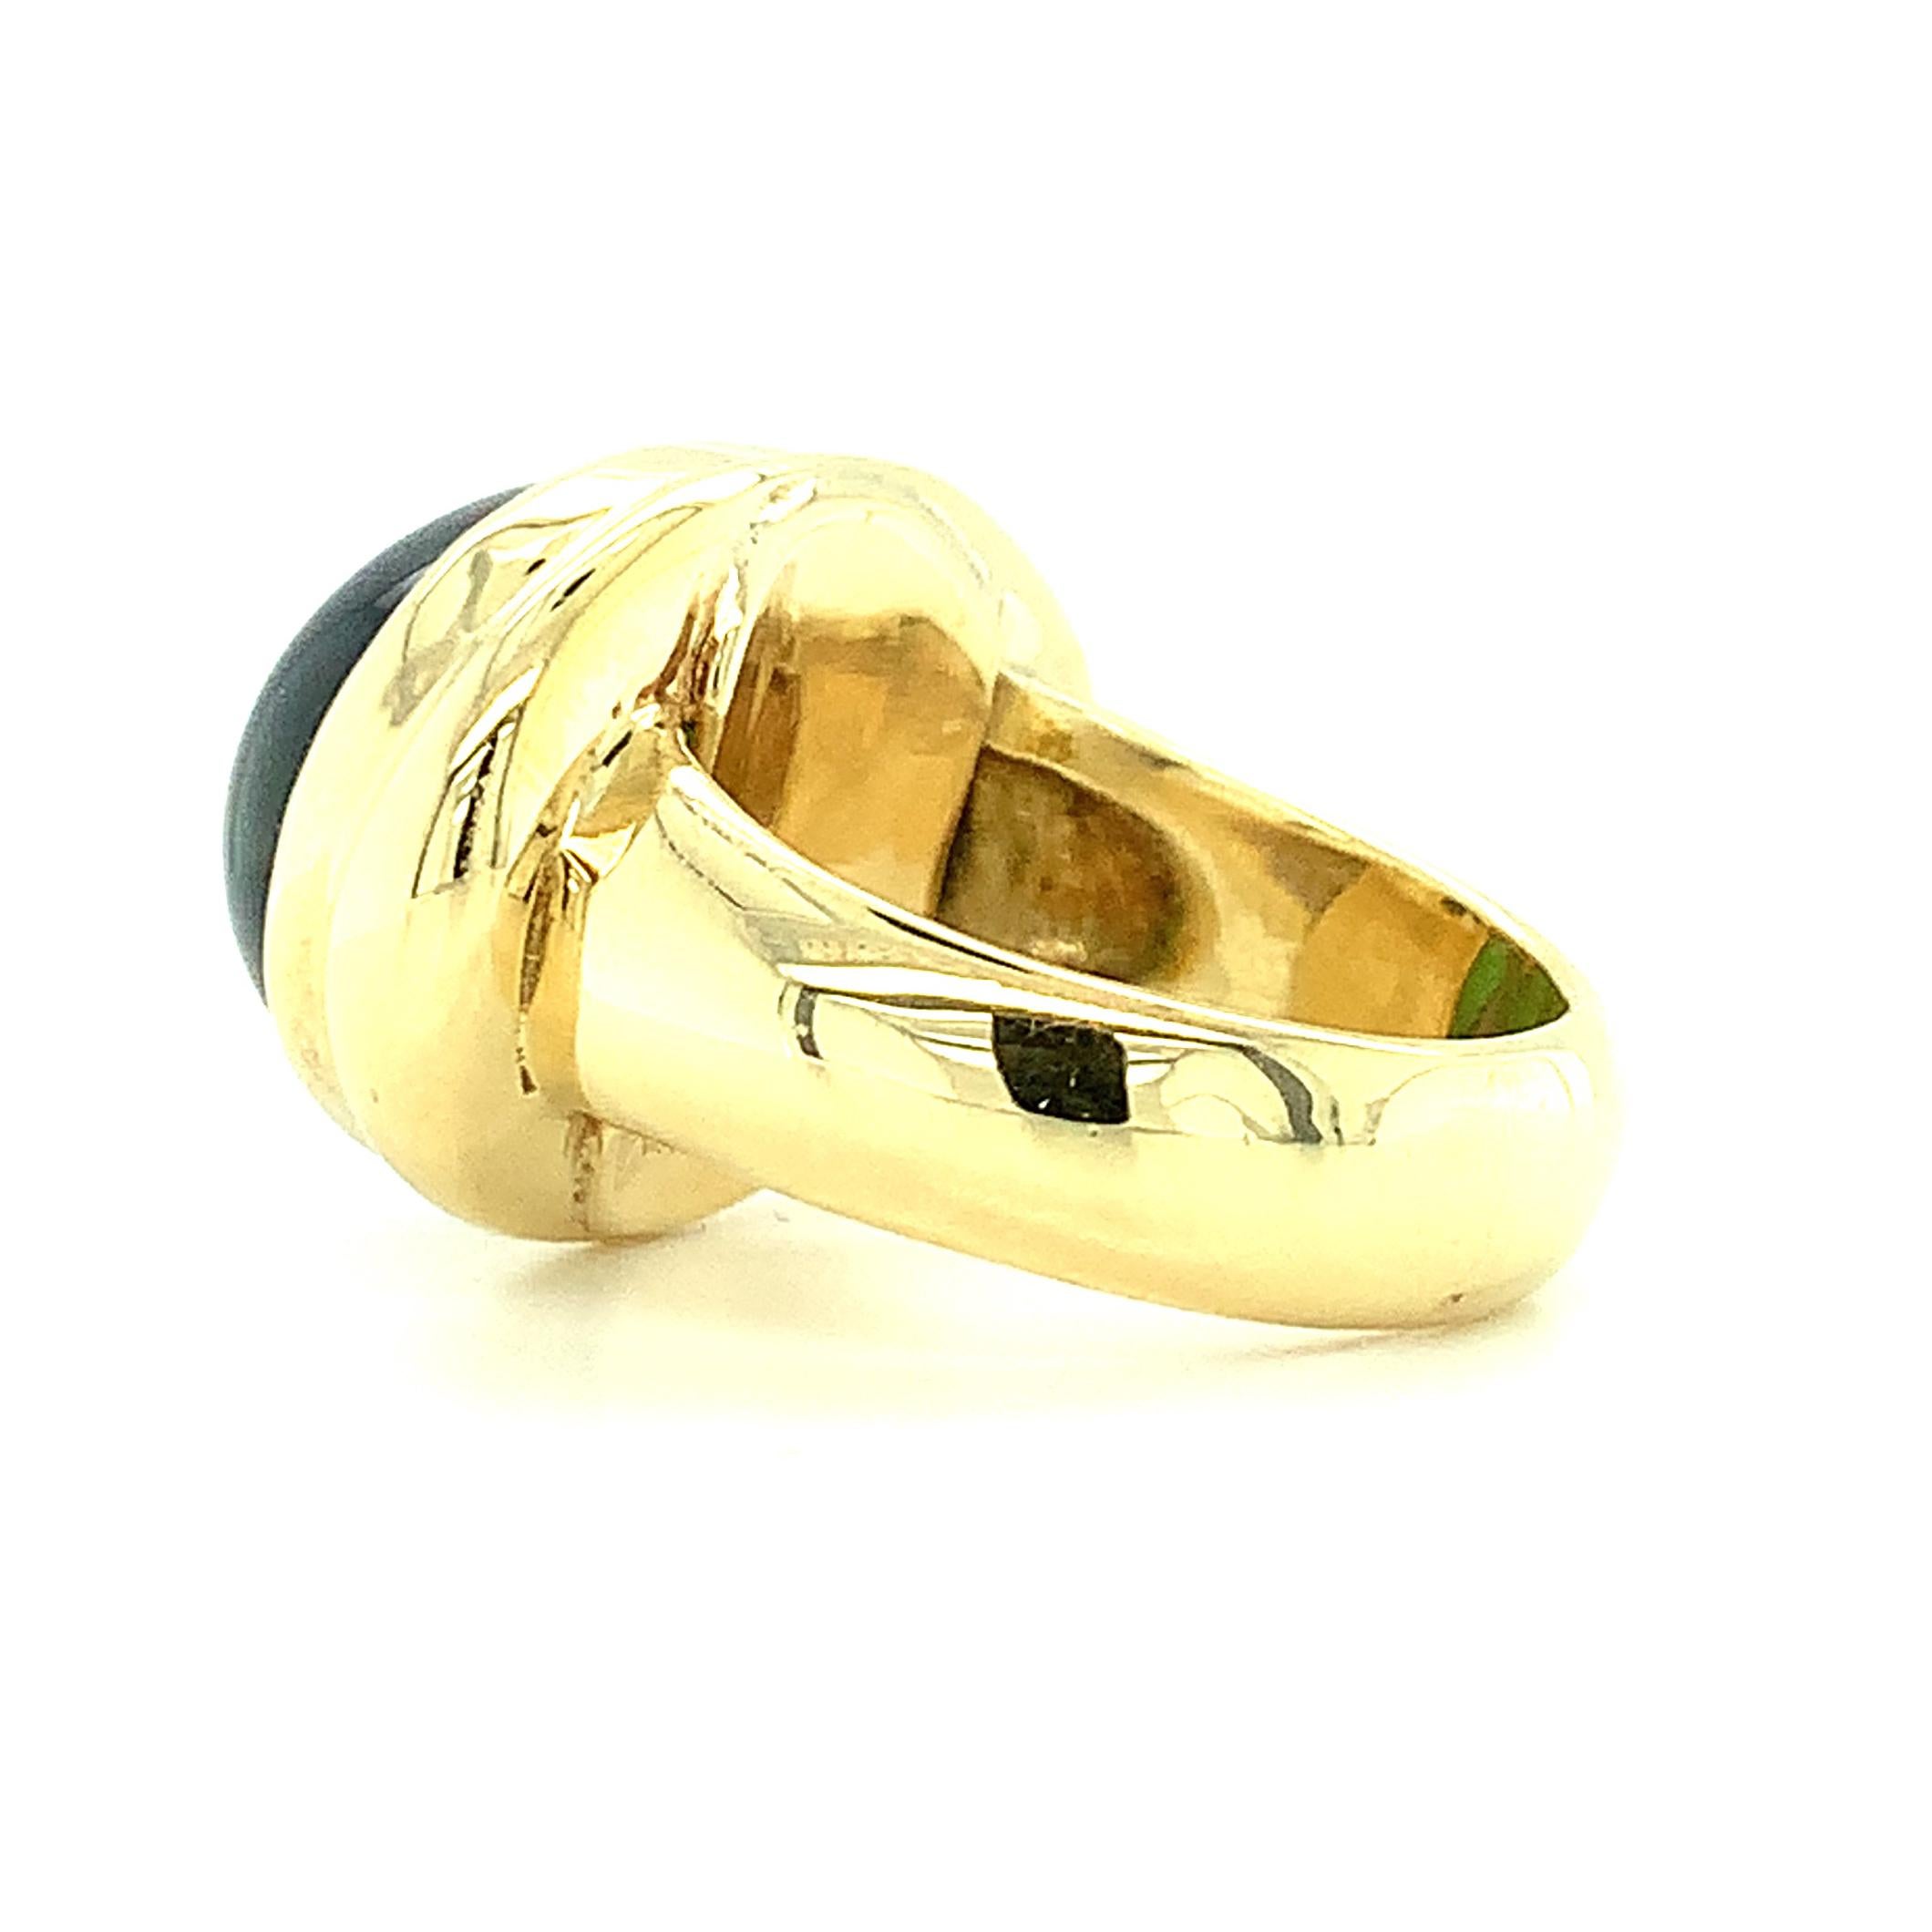 Green Tourmaline Cabochon and 18k Yellow Gold Bezel Ring,  21.40 Carats  For Sale 1